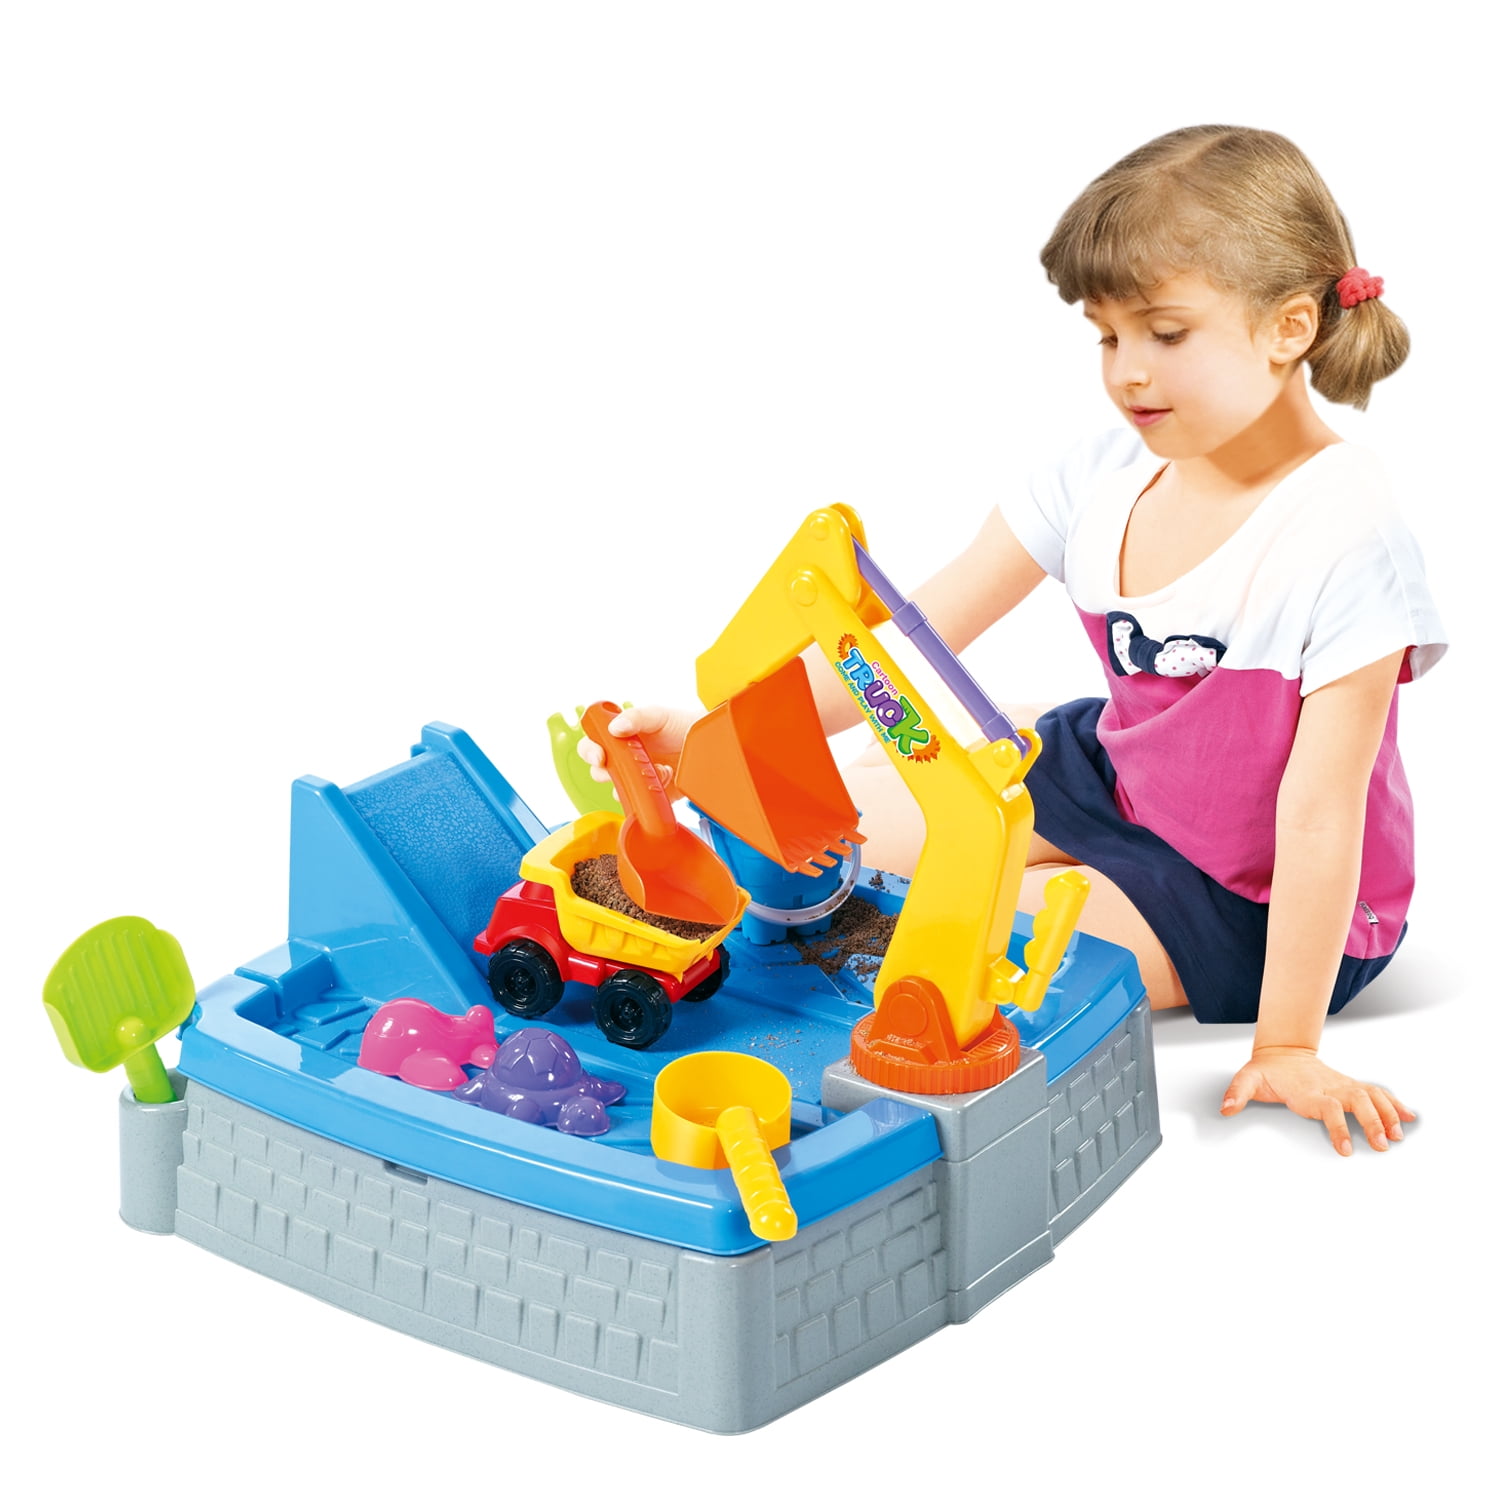 Details about   Set Sand Box Big Sandbox Digger Lid Outdoor Activity Play Toys Kids Plastic New 